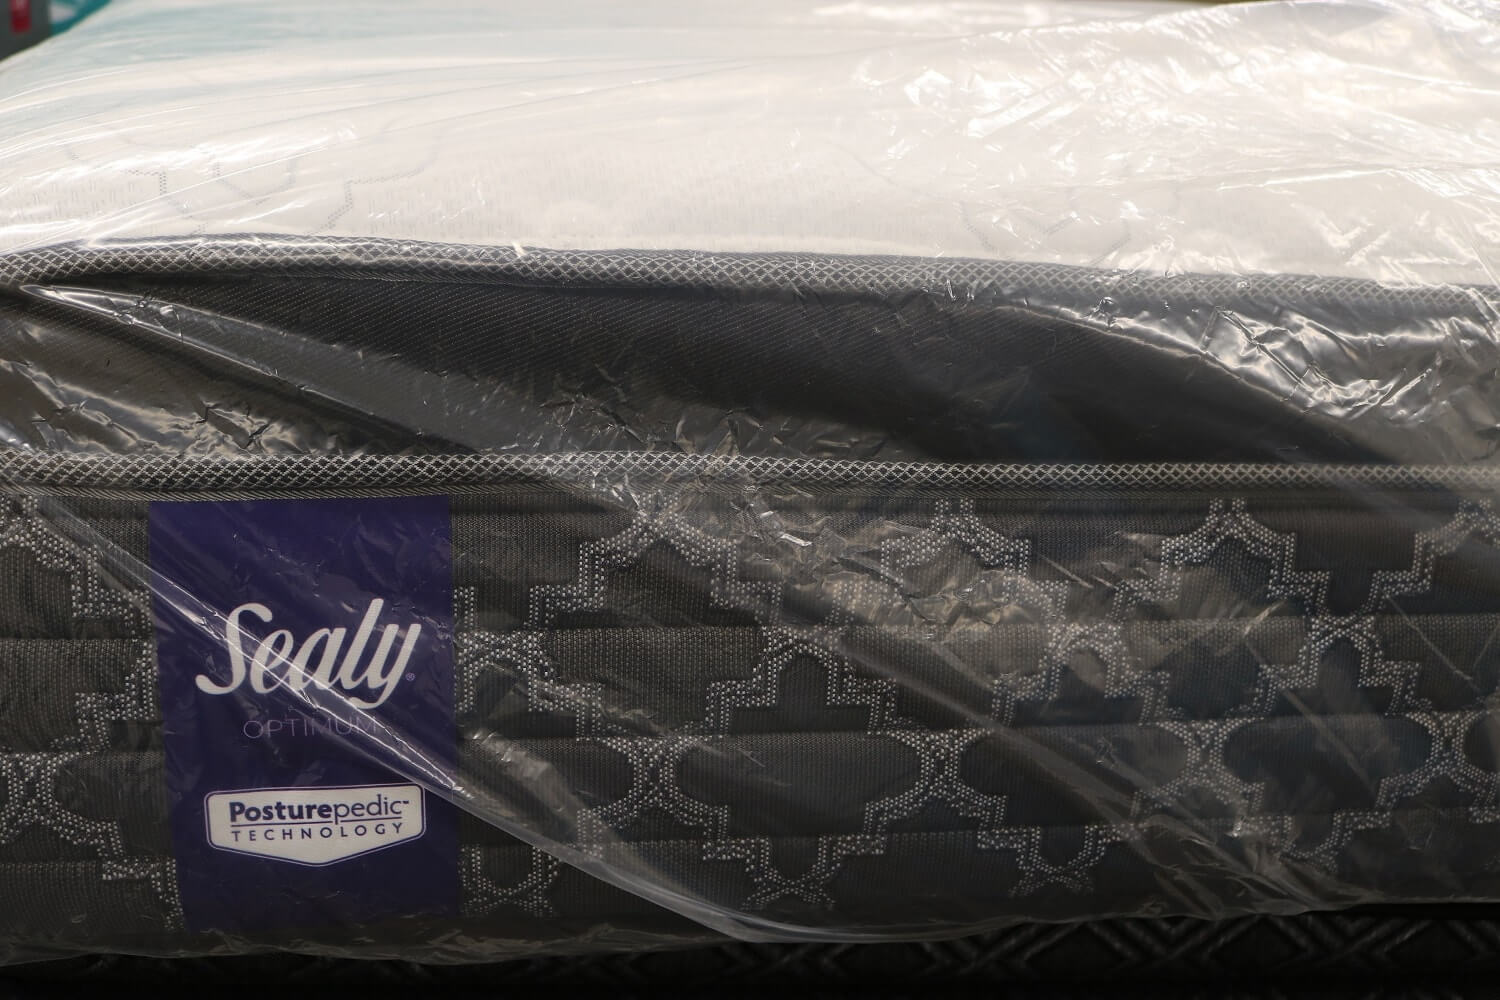 Image of the Sealy Posturepedic Guilford mattress in plastic wrapping.